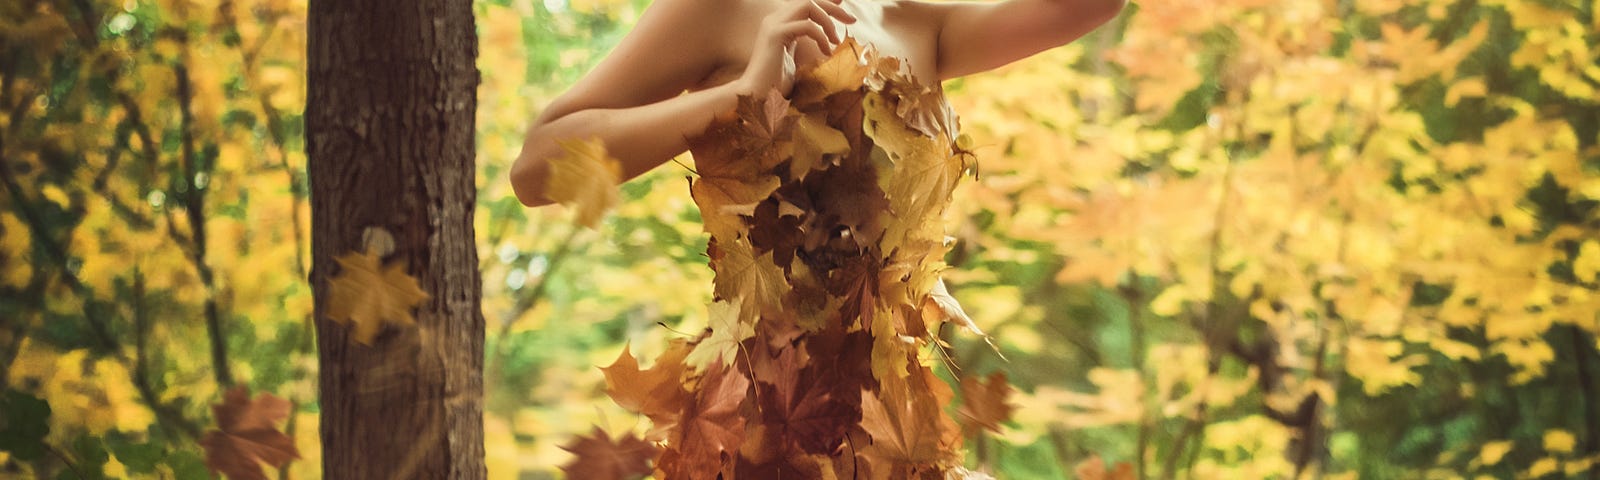 fairy woman dressed in (or made of) leaves